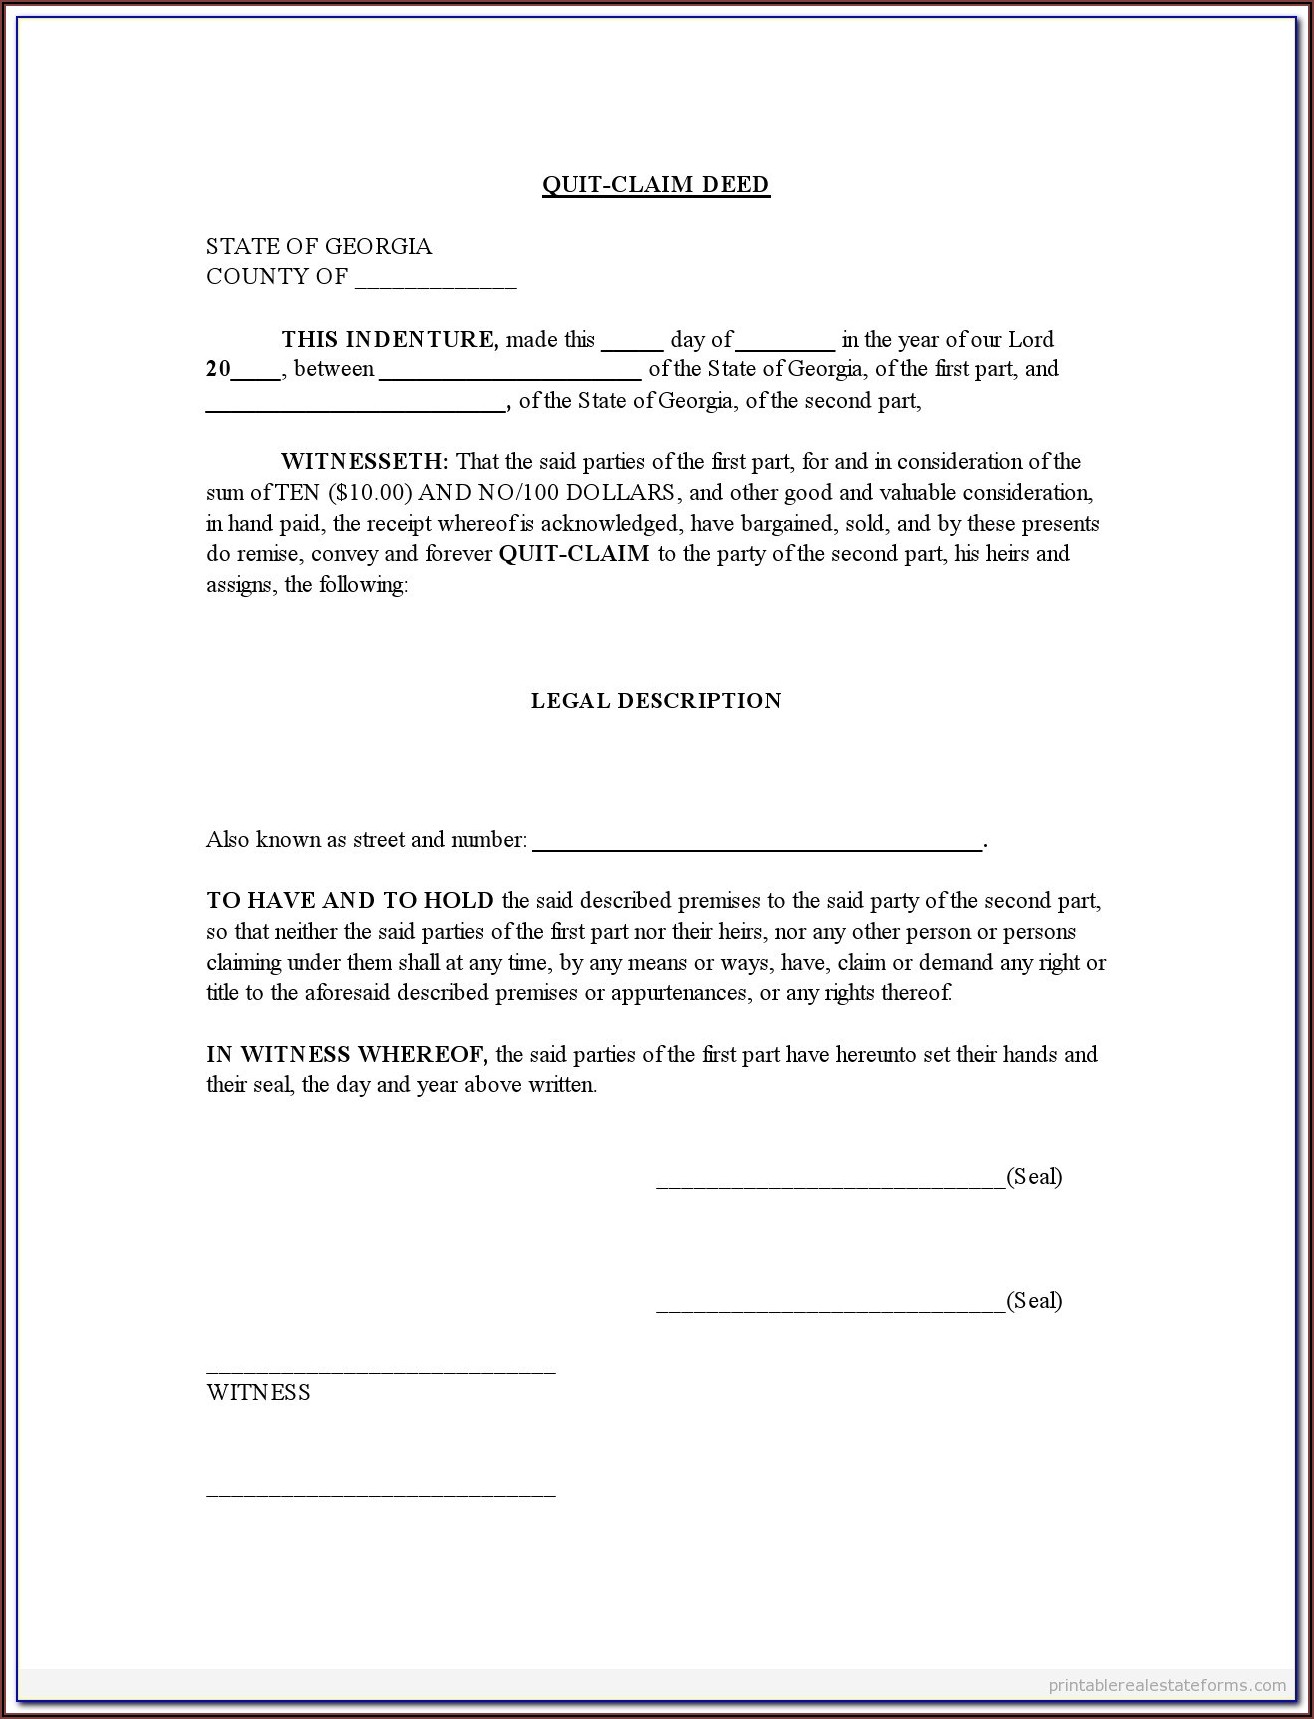 quit-claim-deed-form-jackson-county-missouri-form-resume-examples